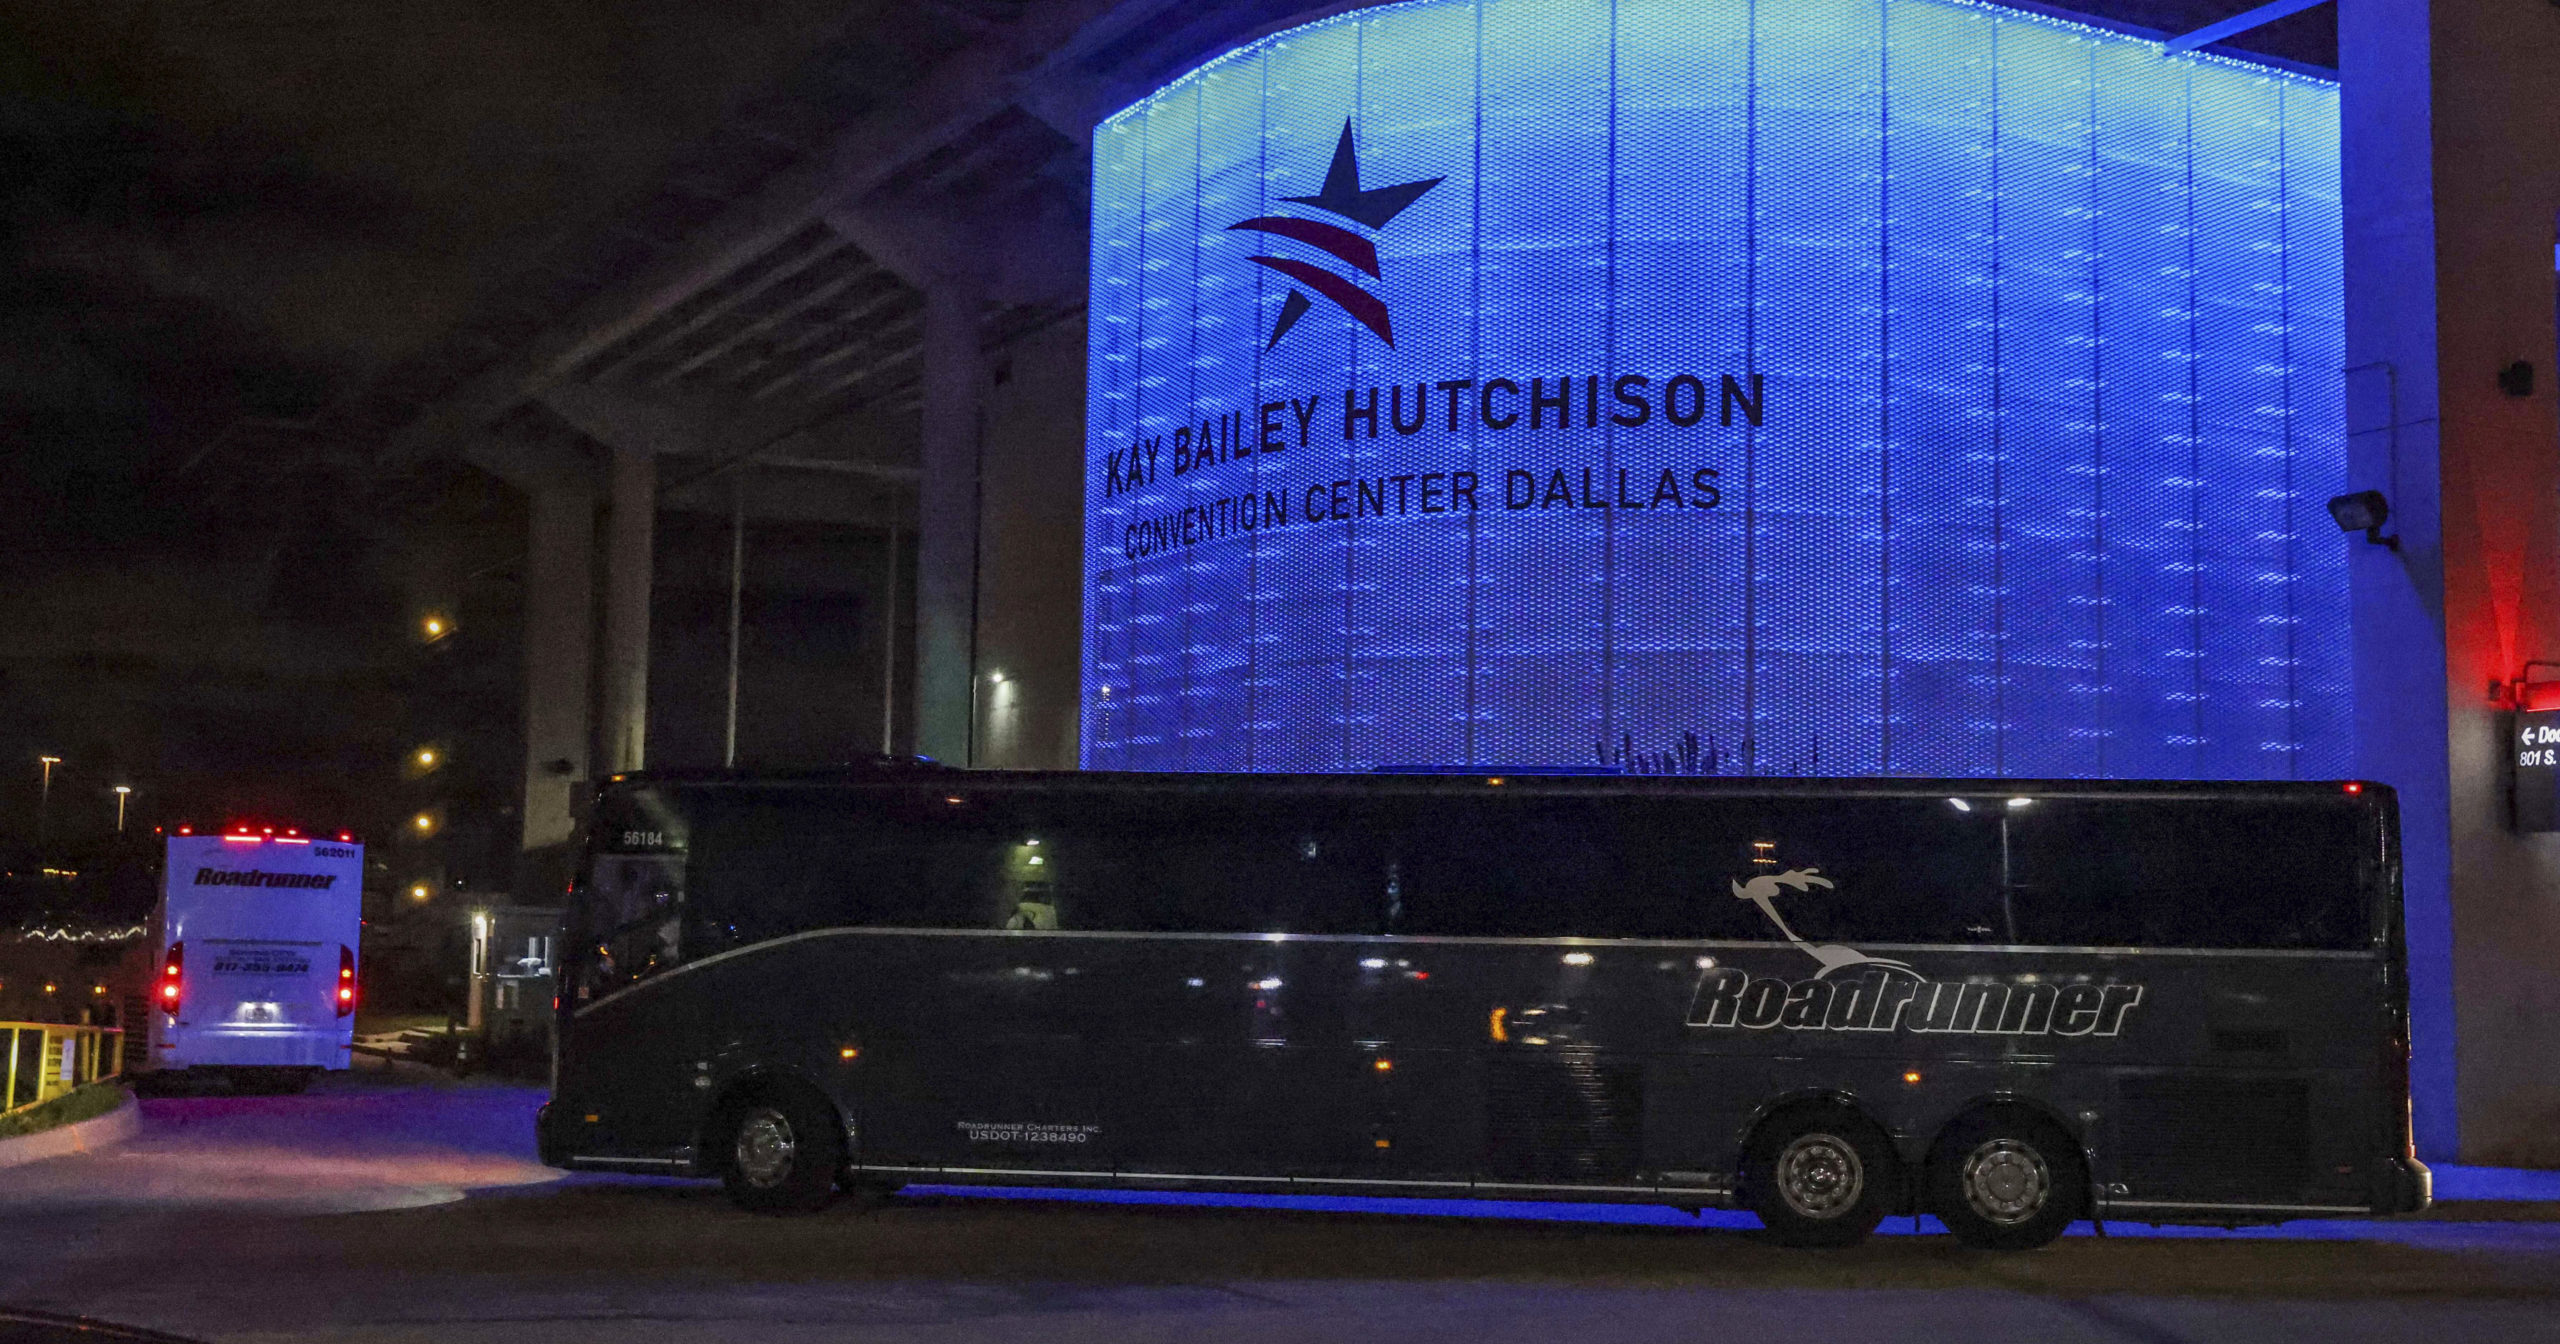 Charter buses arrive at the Kay Bailey Hutchison Convention Center in Dallas on March 17, 2021